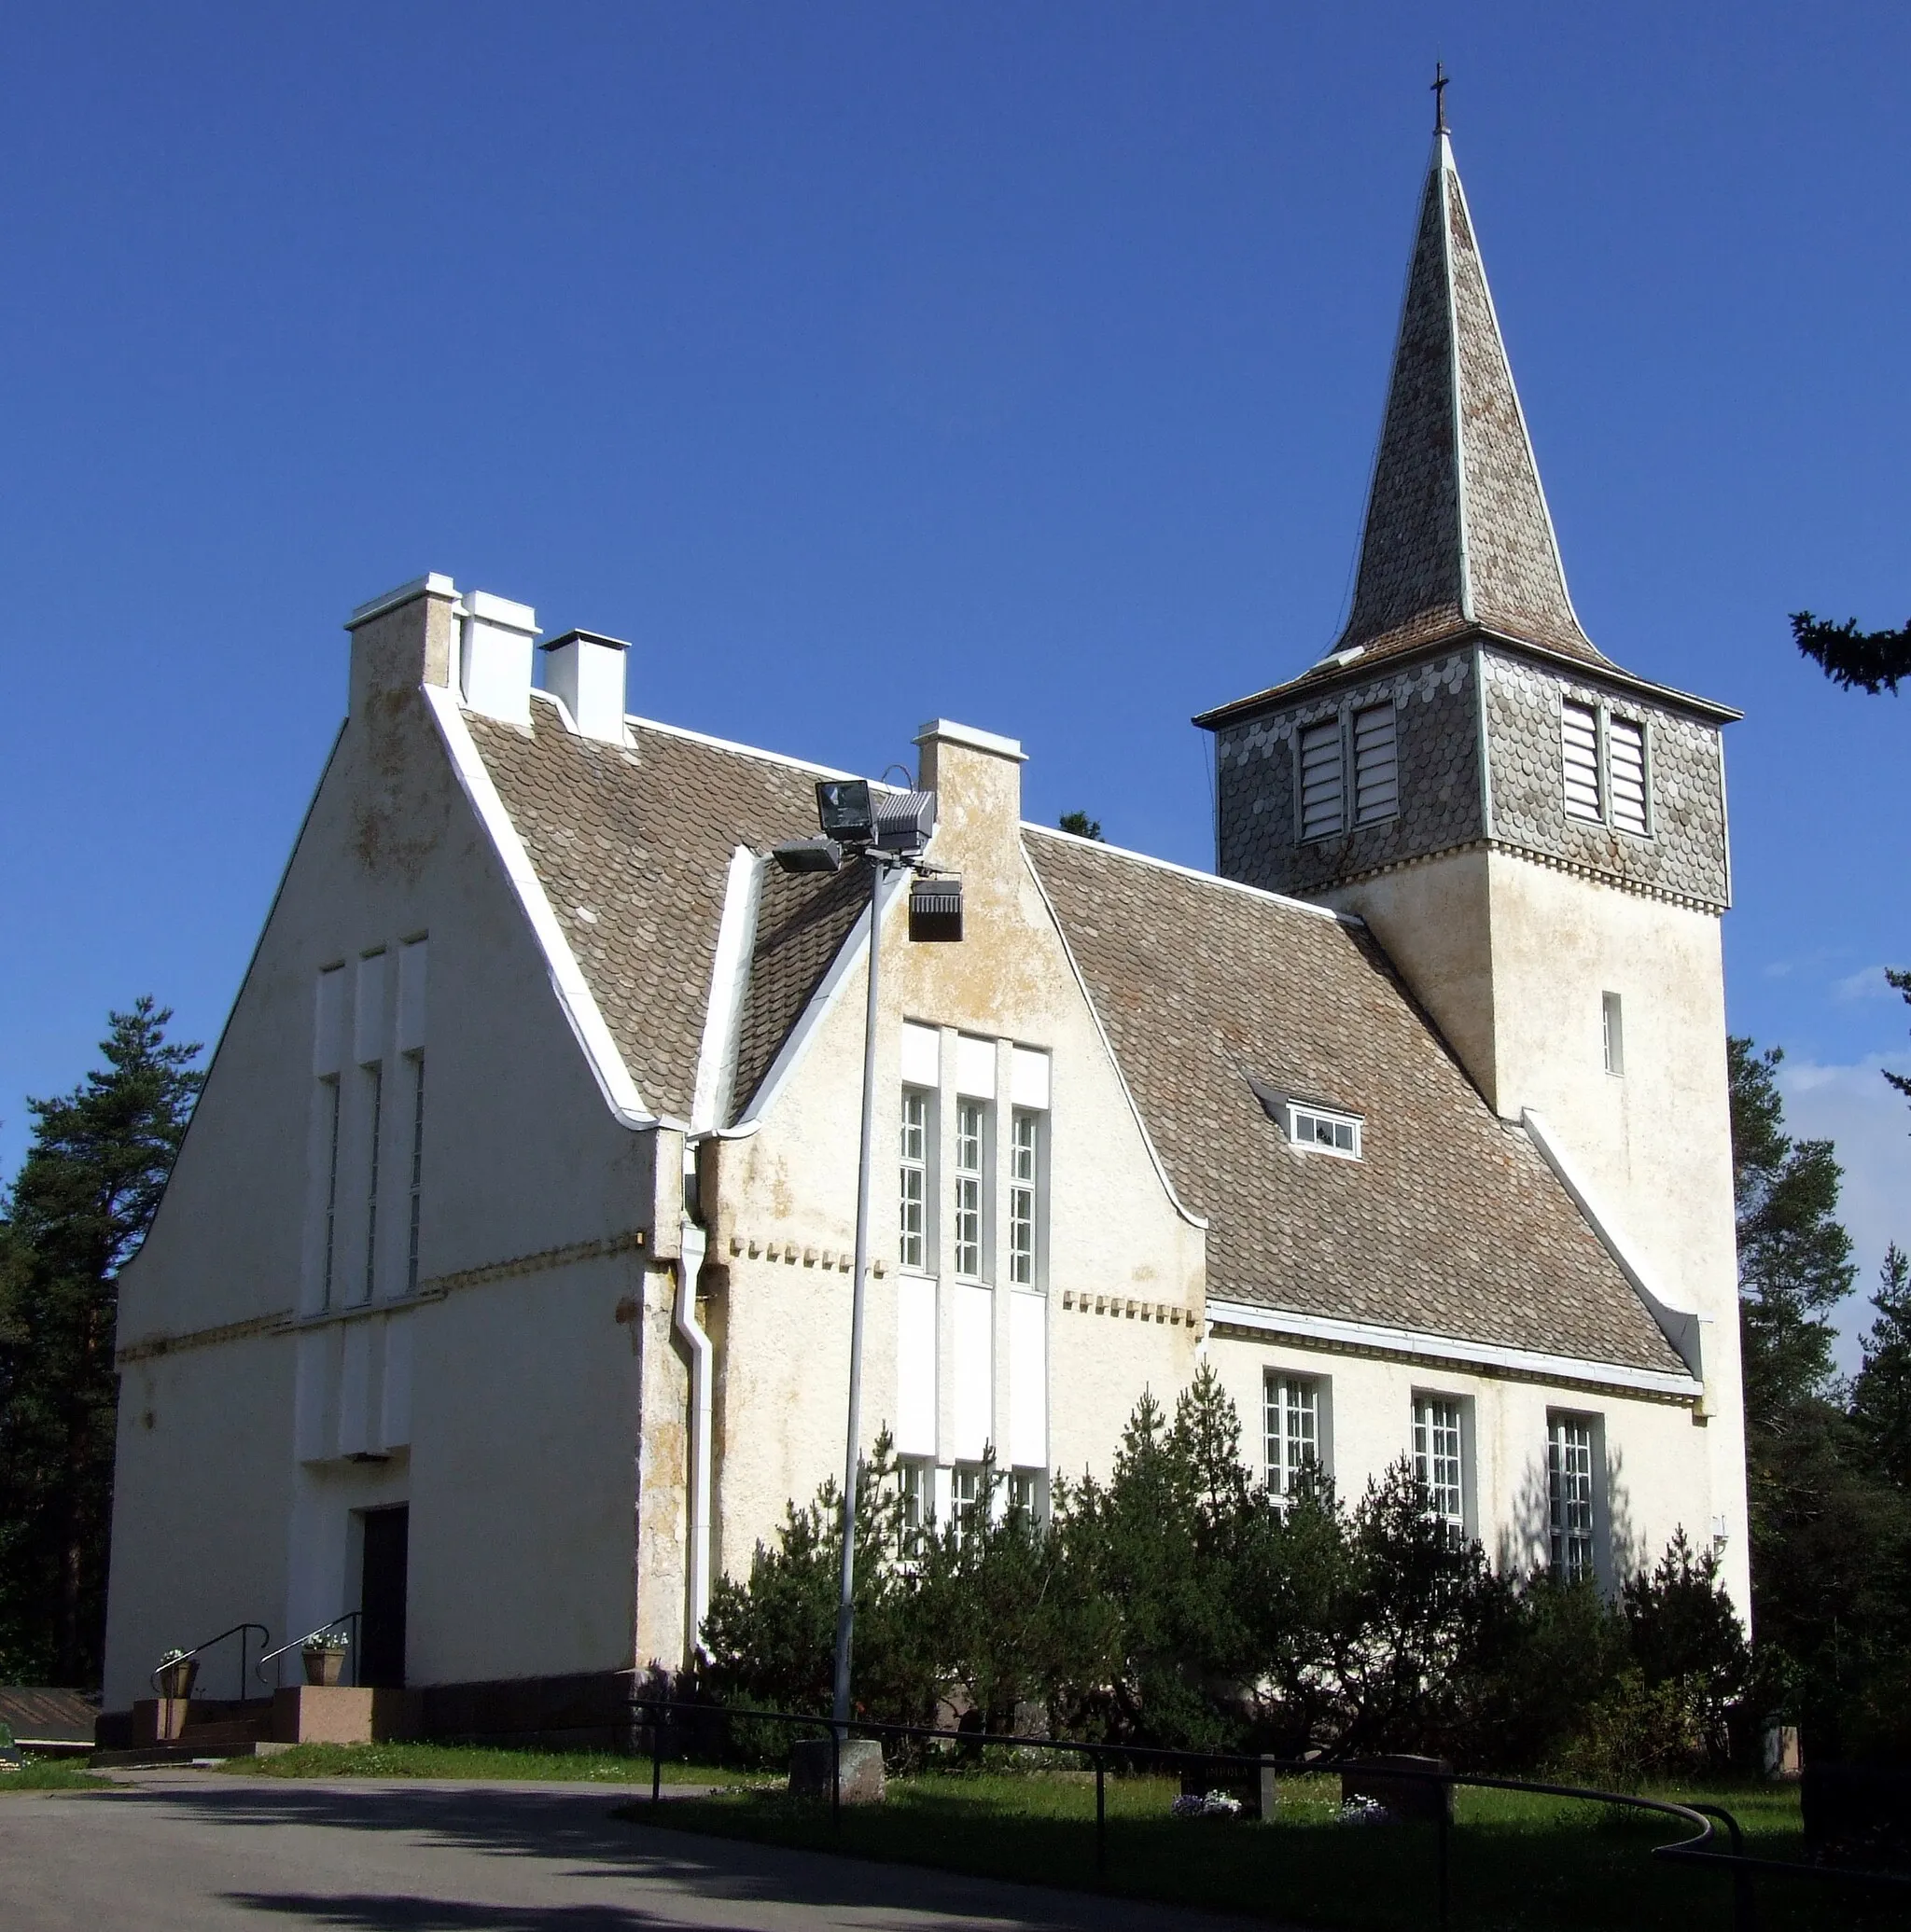 Photo showing: The church of Pattijoki in Raahe, Finland. The church was designed by architect Josef Stenbäck and completed in 1912.